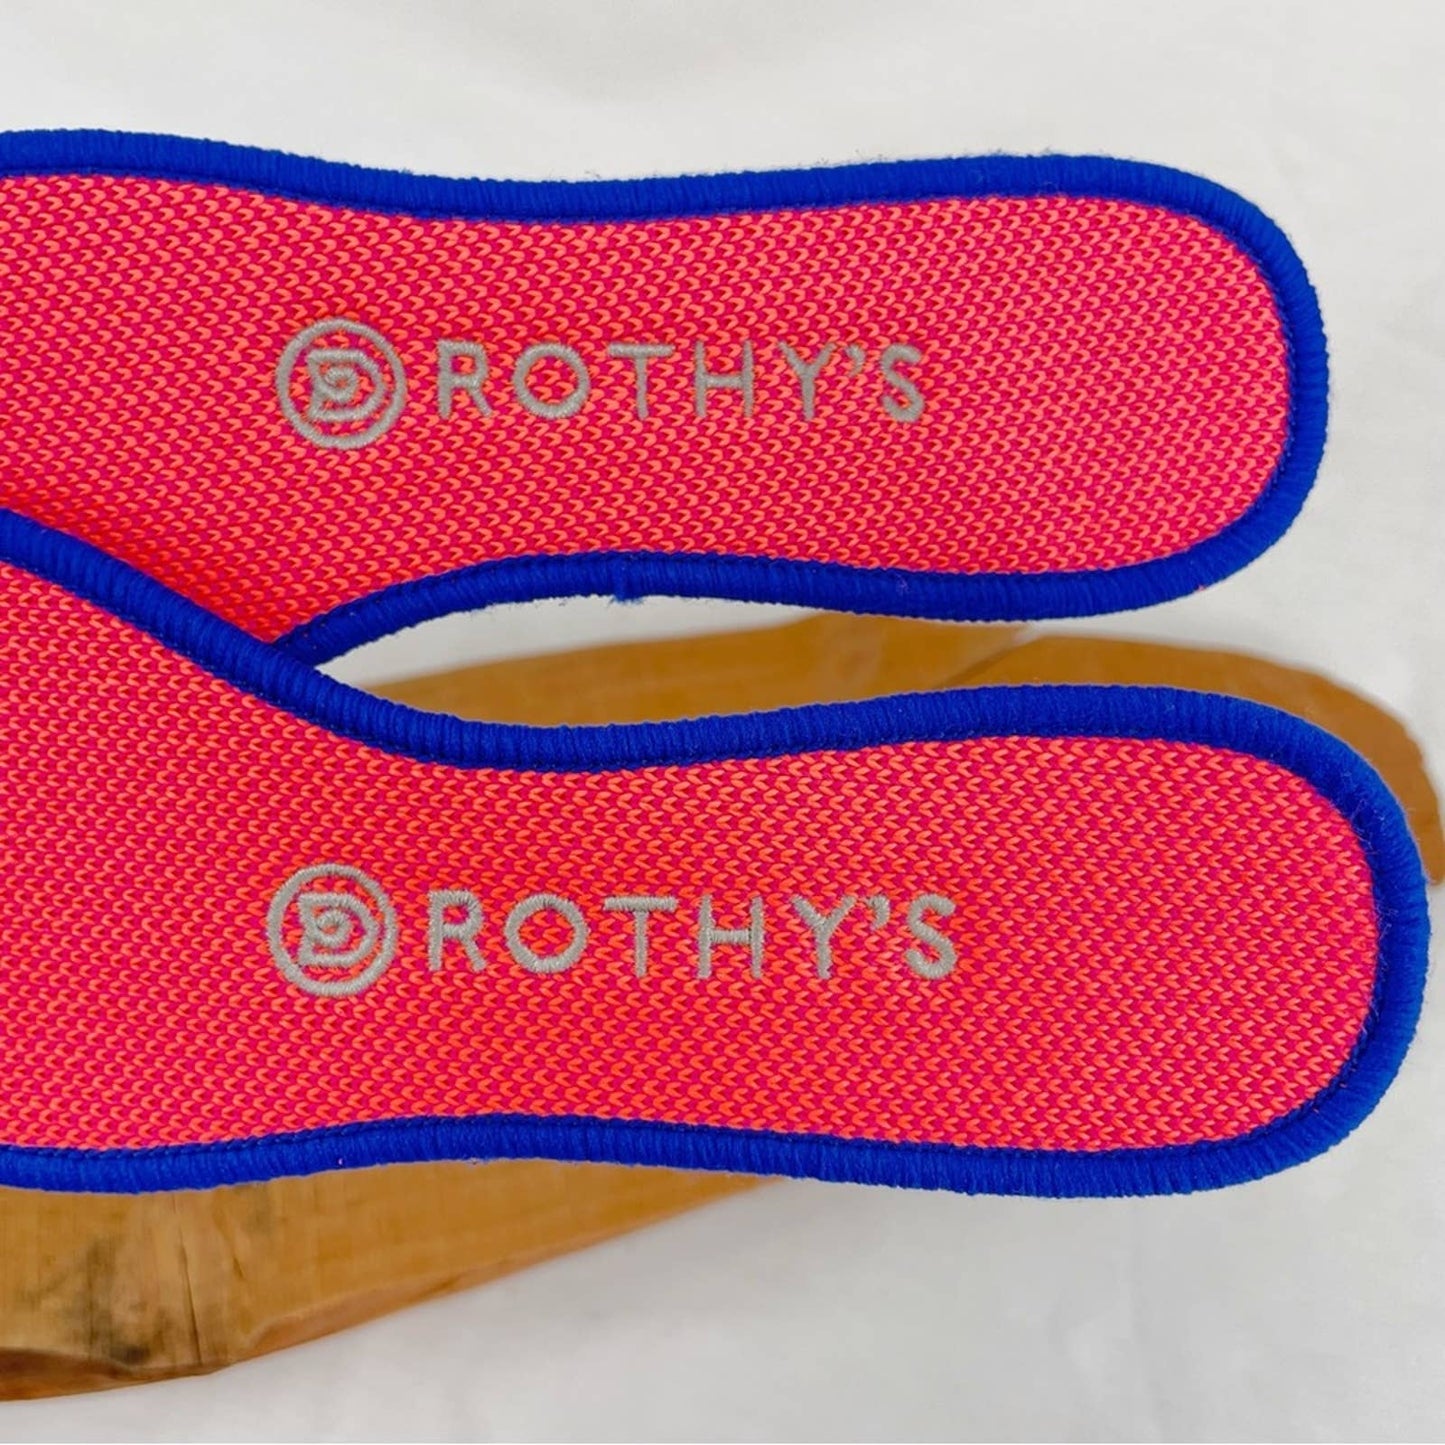 Rothy’s The Loafer Flamingo Hot Pink Neon Orange Smoking Flats Slip On Shoes Size 8